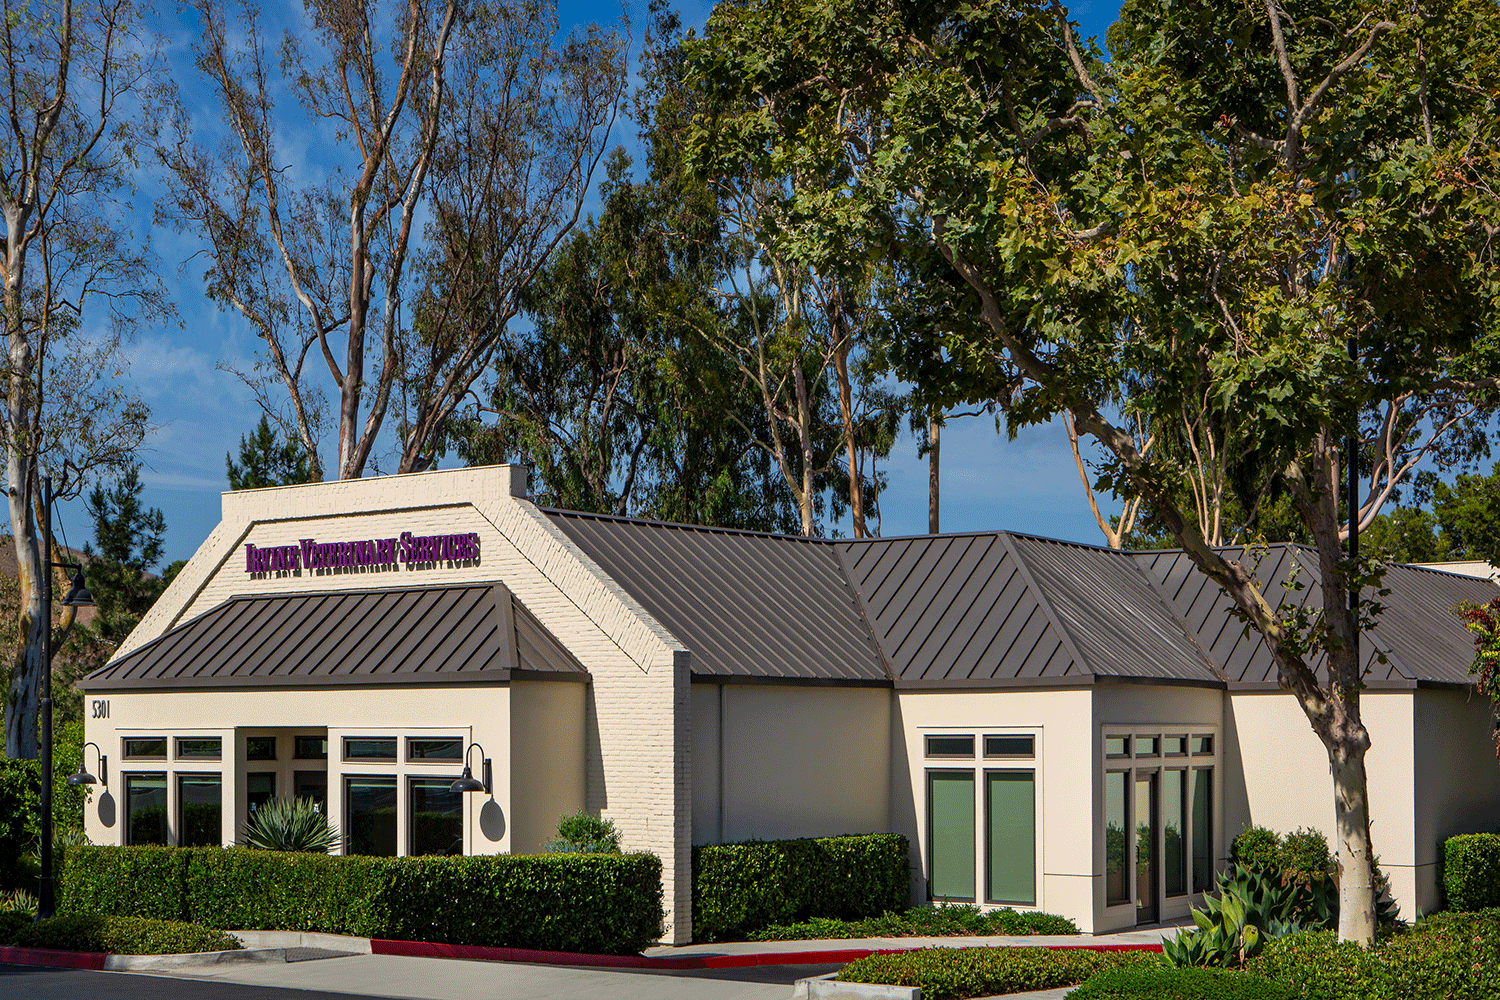  View of Irvine Veterinary Services at Parkview Center